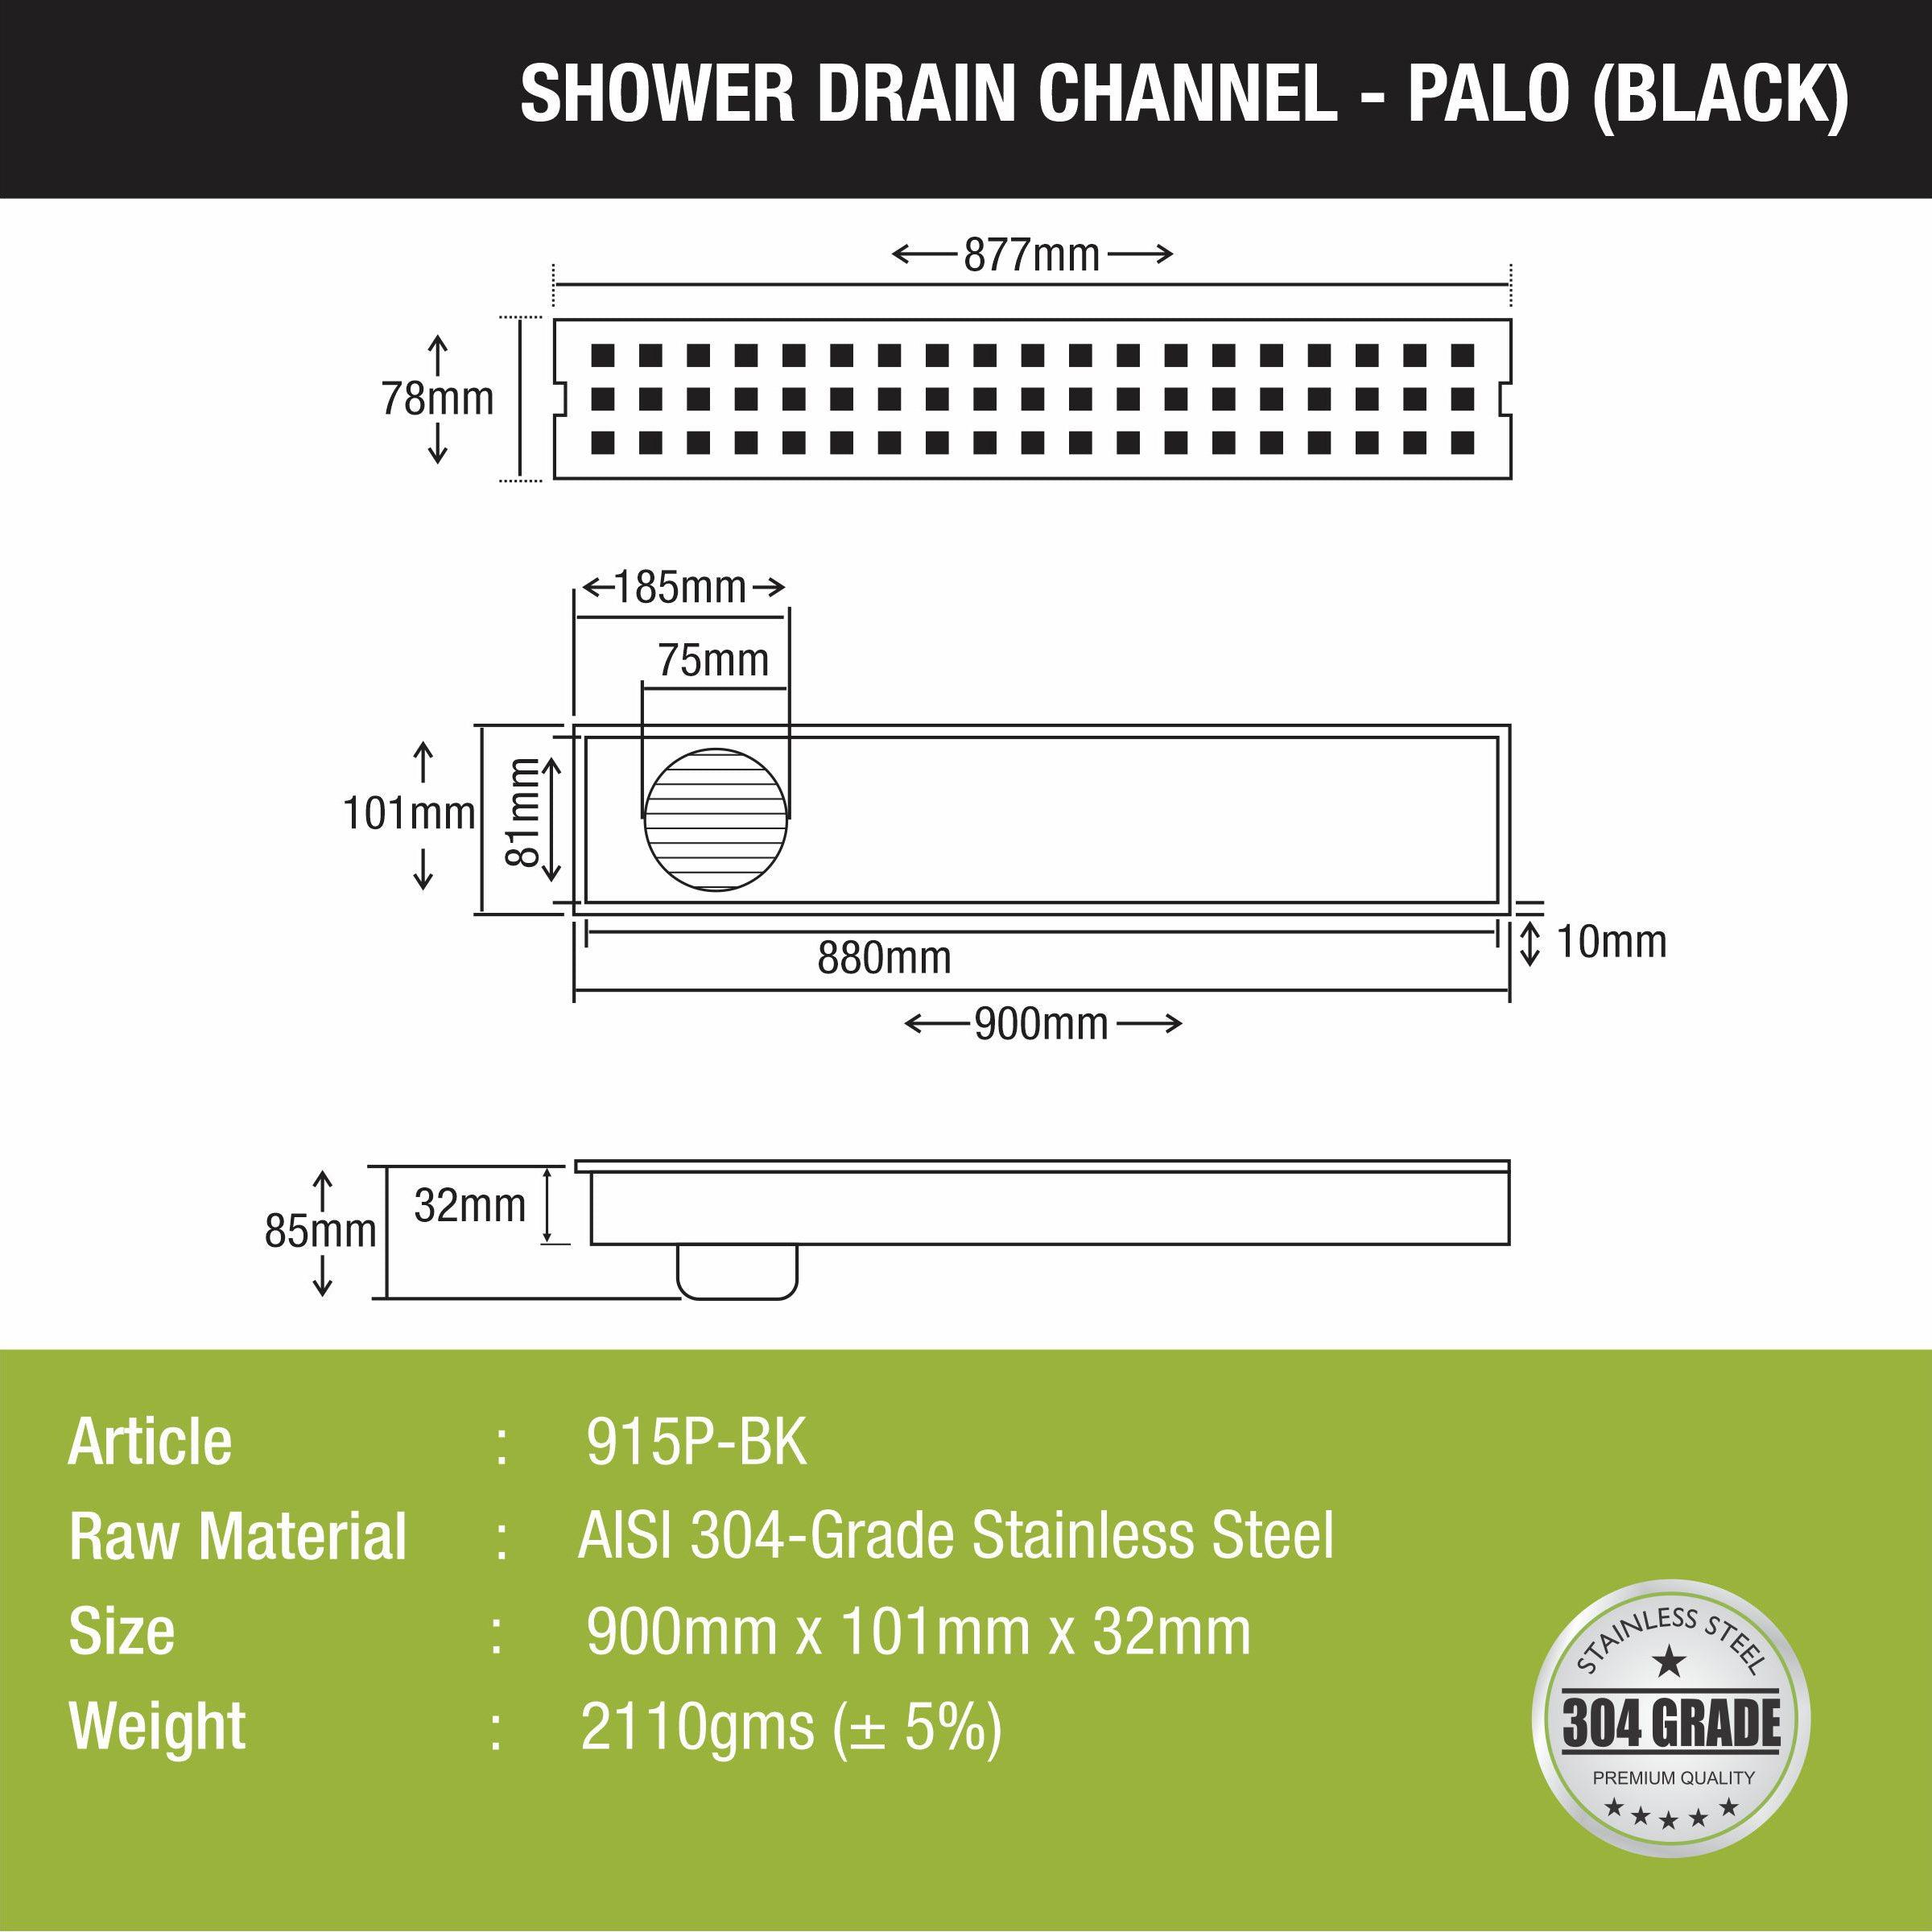 Palo Shower Drain Channel - Black (36 x 4 Inches) size and measurement